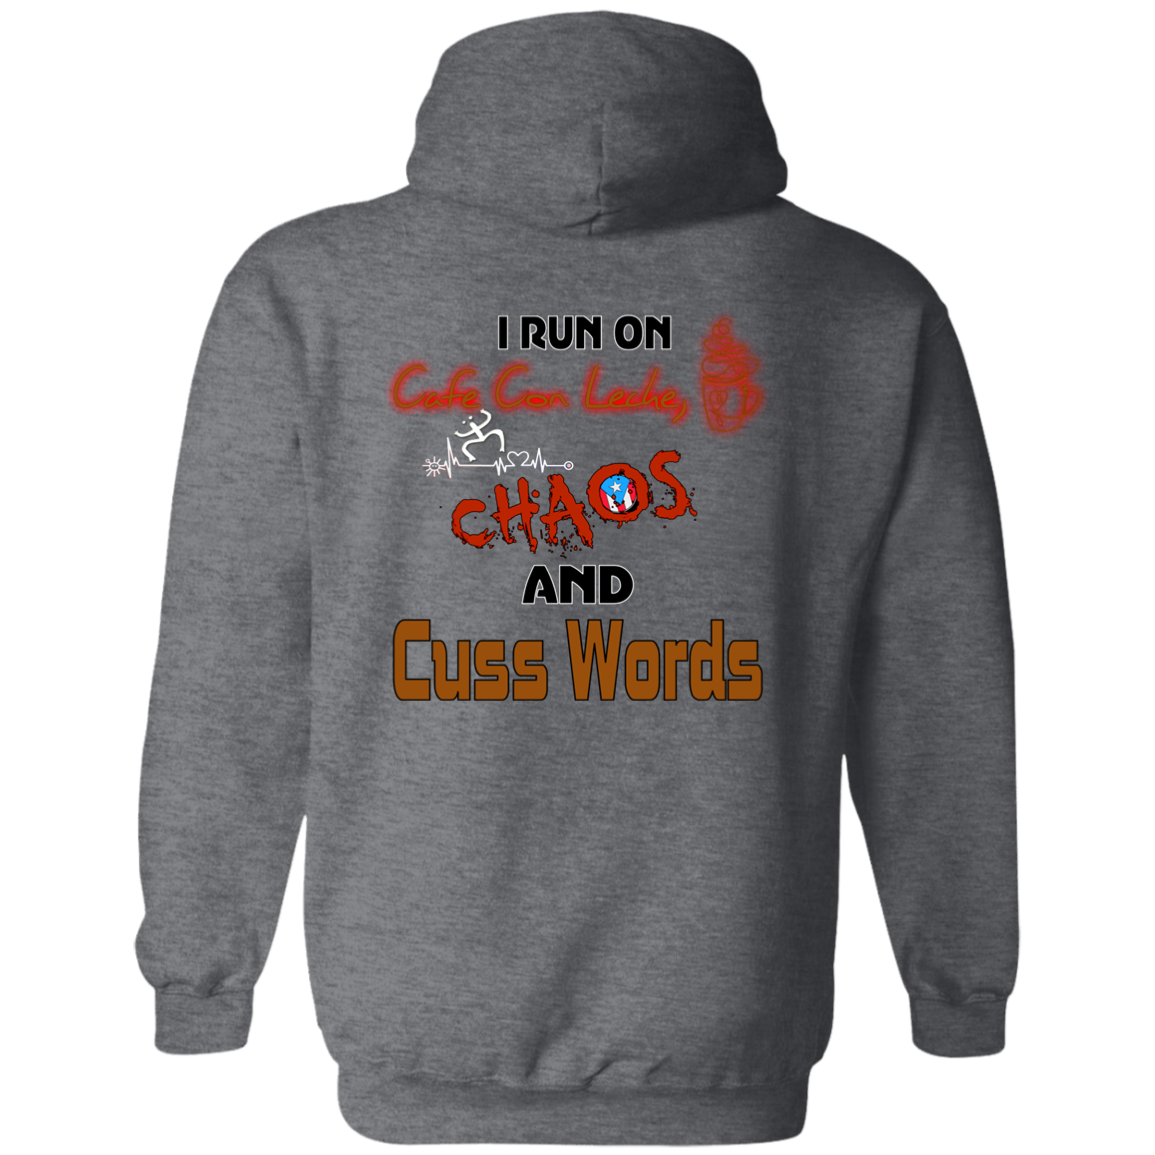 Cafe Con Leche, Chaos and Cuss Words  Hoodie 8 oz